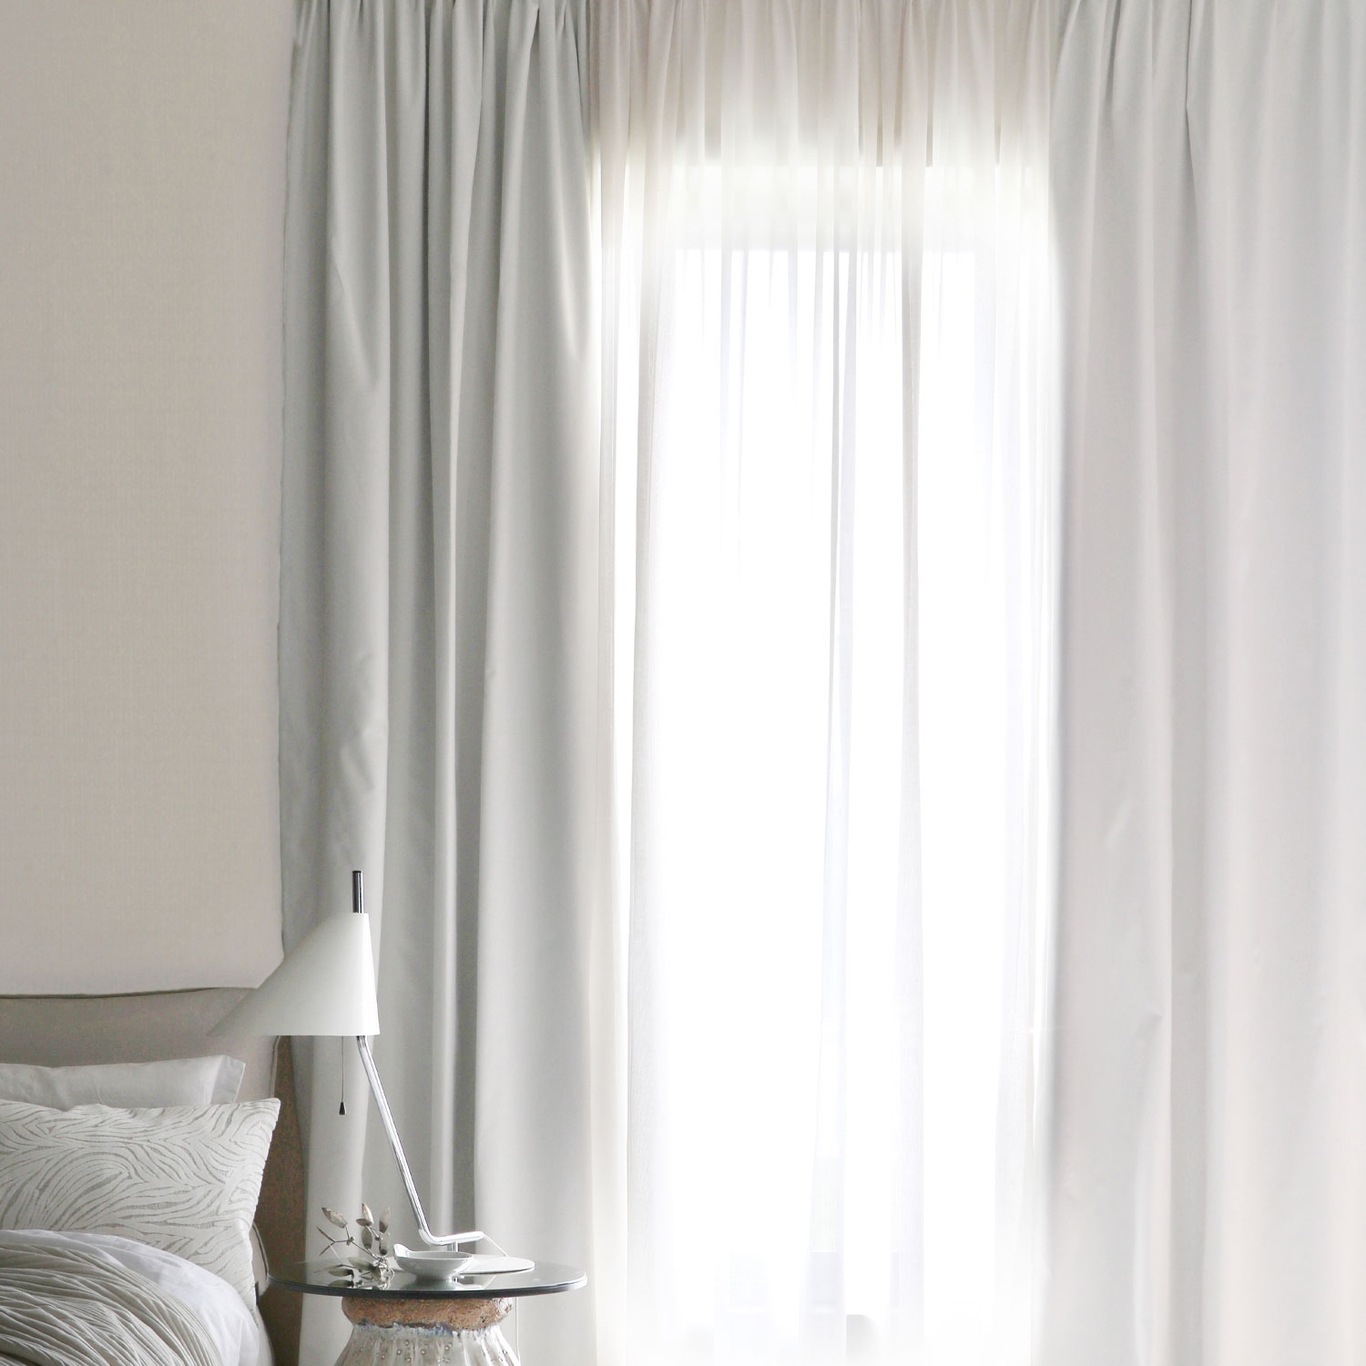 Shelby Blackout Curtain Natural White, 135x250 cm